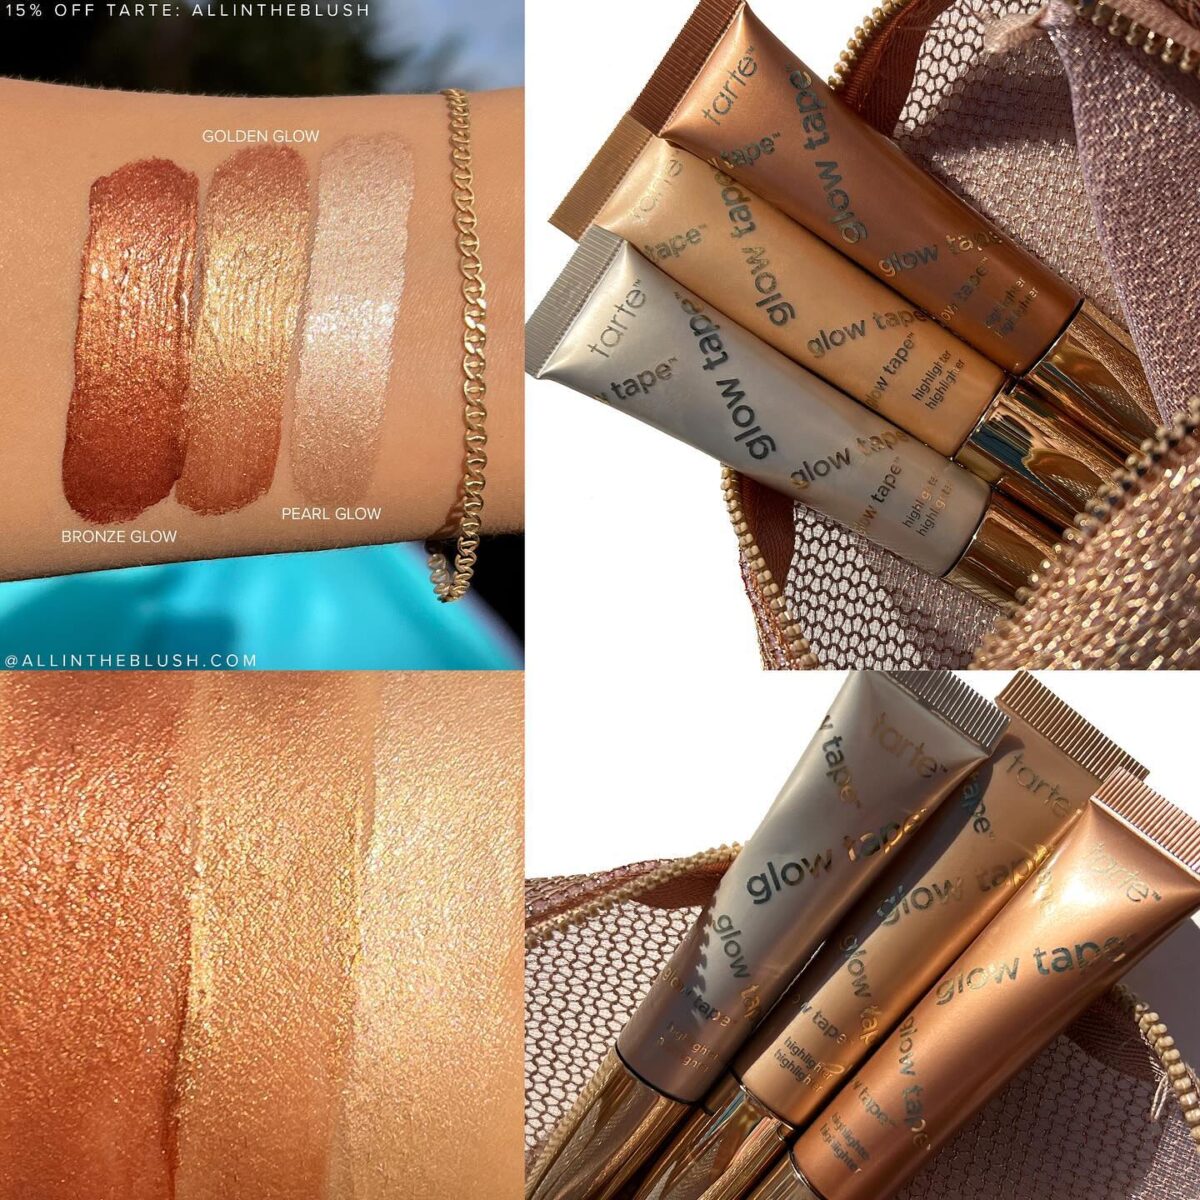 Tarte Glow Tape Highlighter Review & Swatches